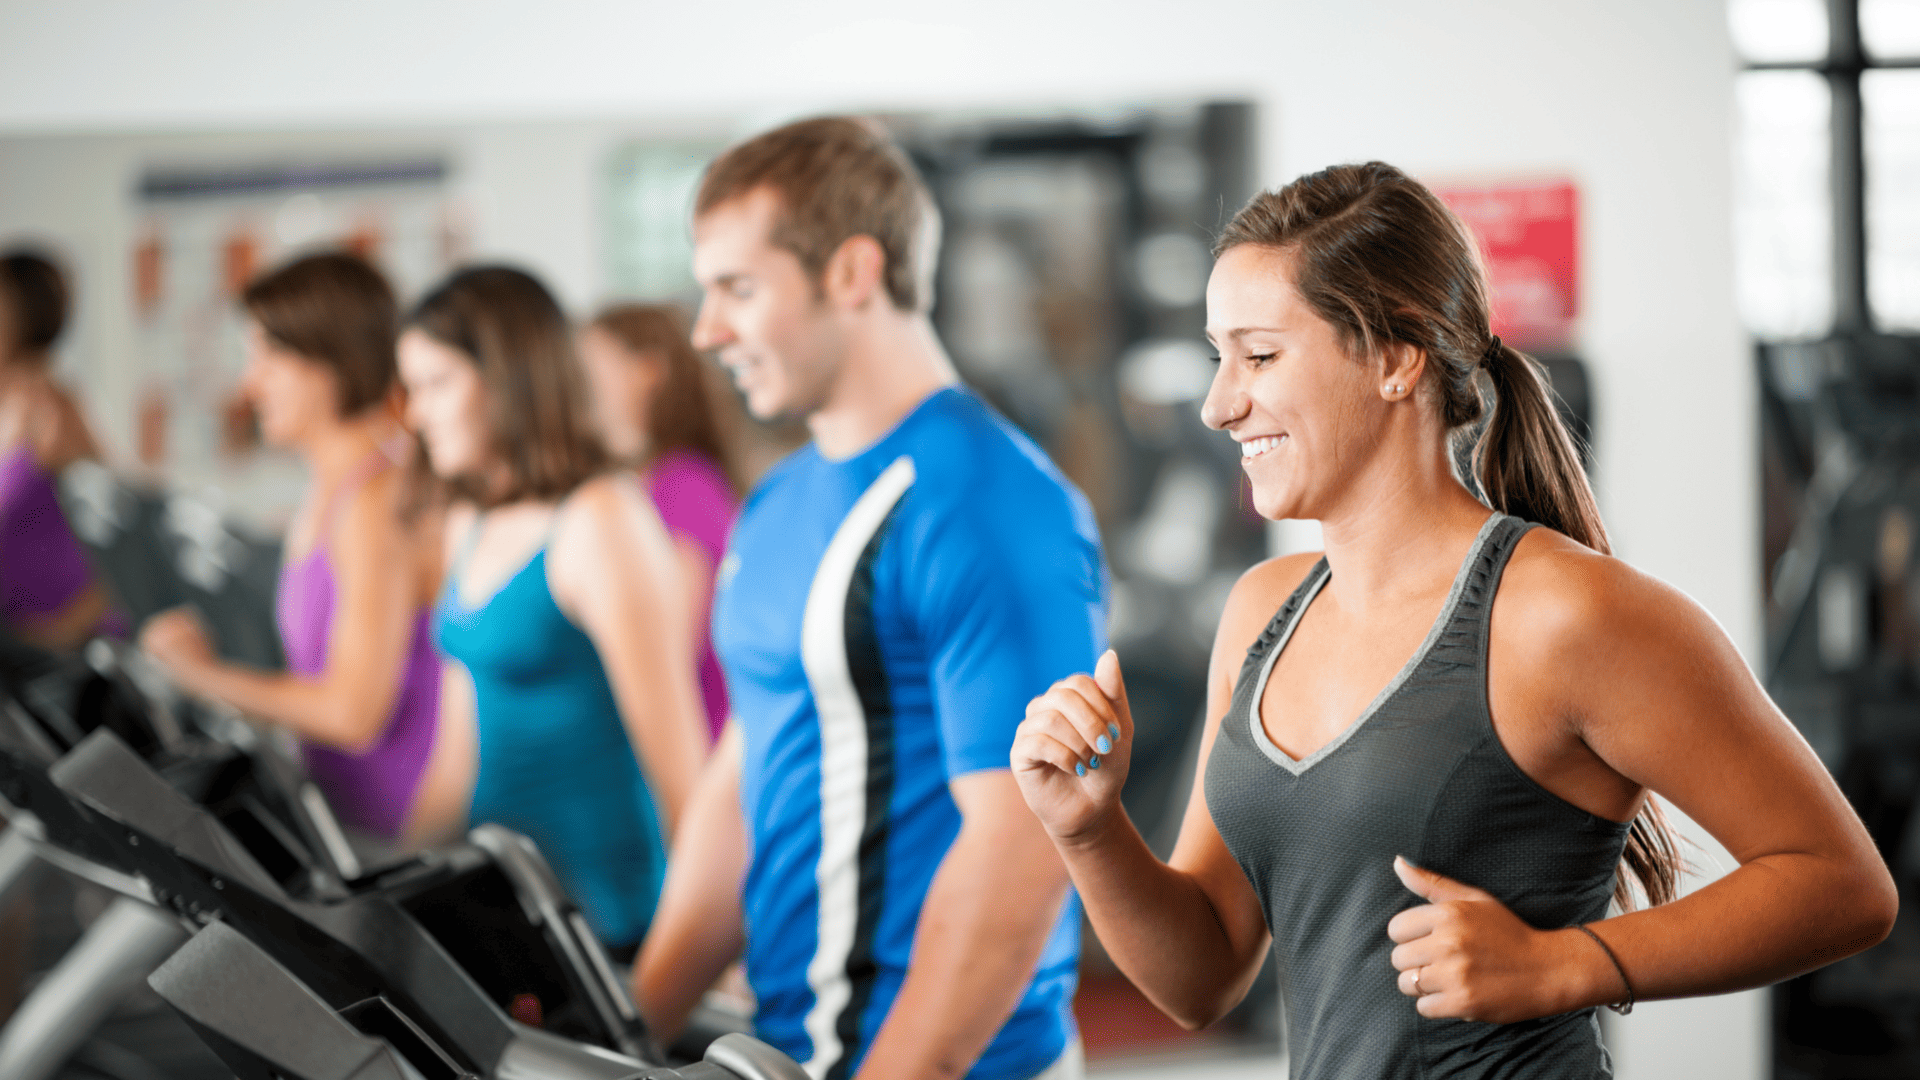 Alternative Revenue Streams: Exploring New Opportunities For Your Gym